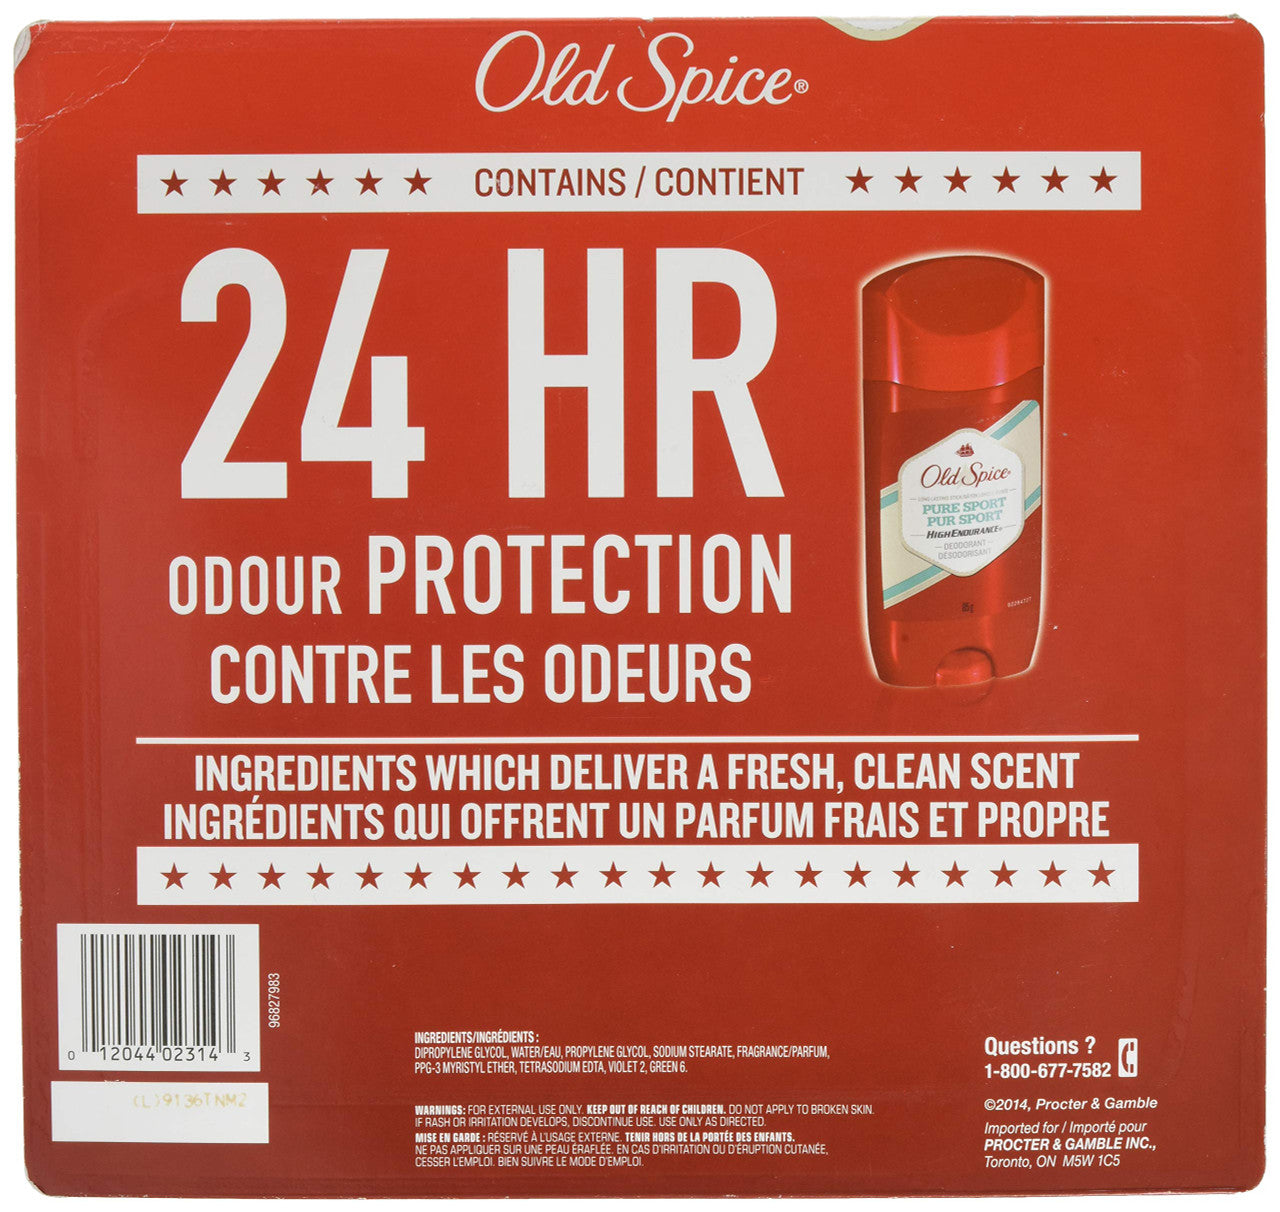 Old Spice High Endurance Deodorant, Pure Sport, 85g (5pk) {Imported from Canada}